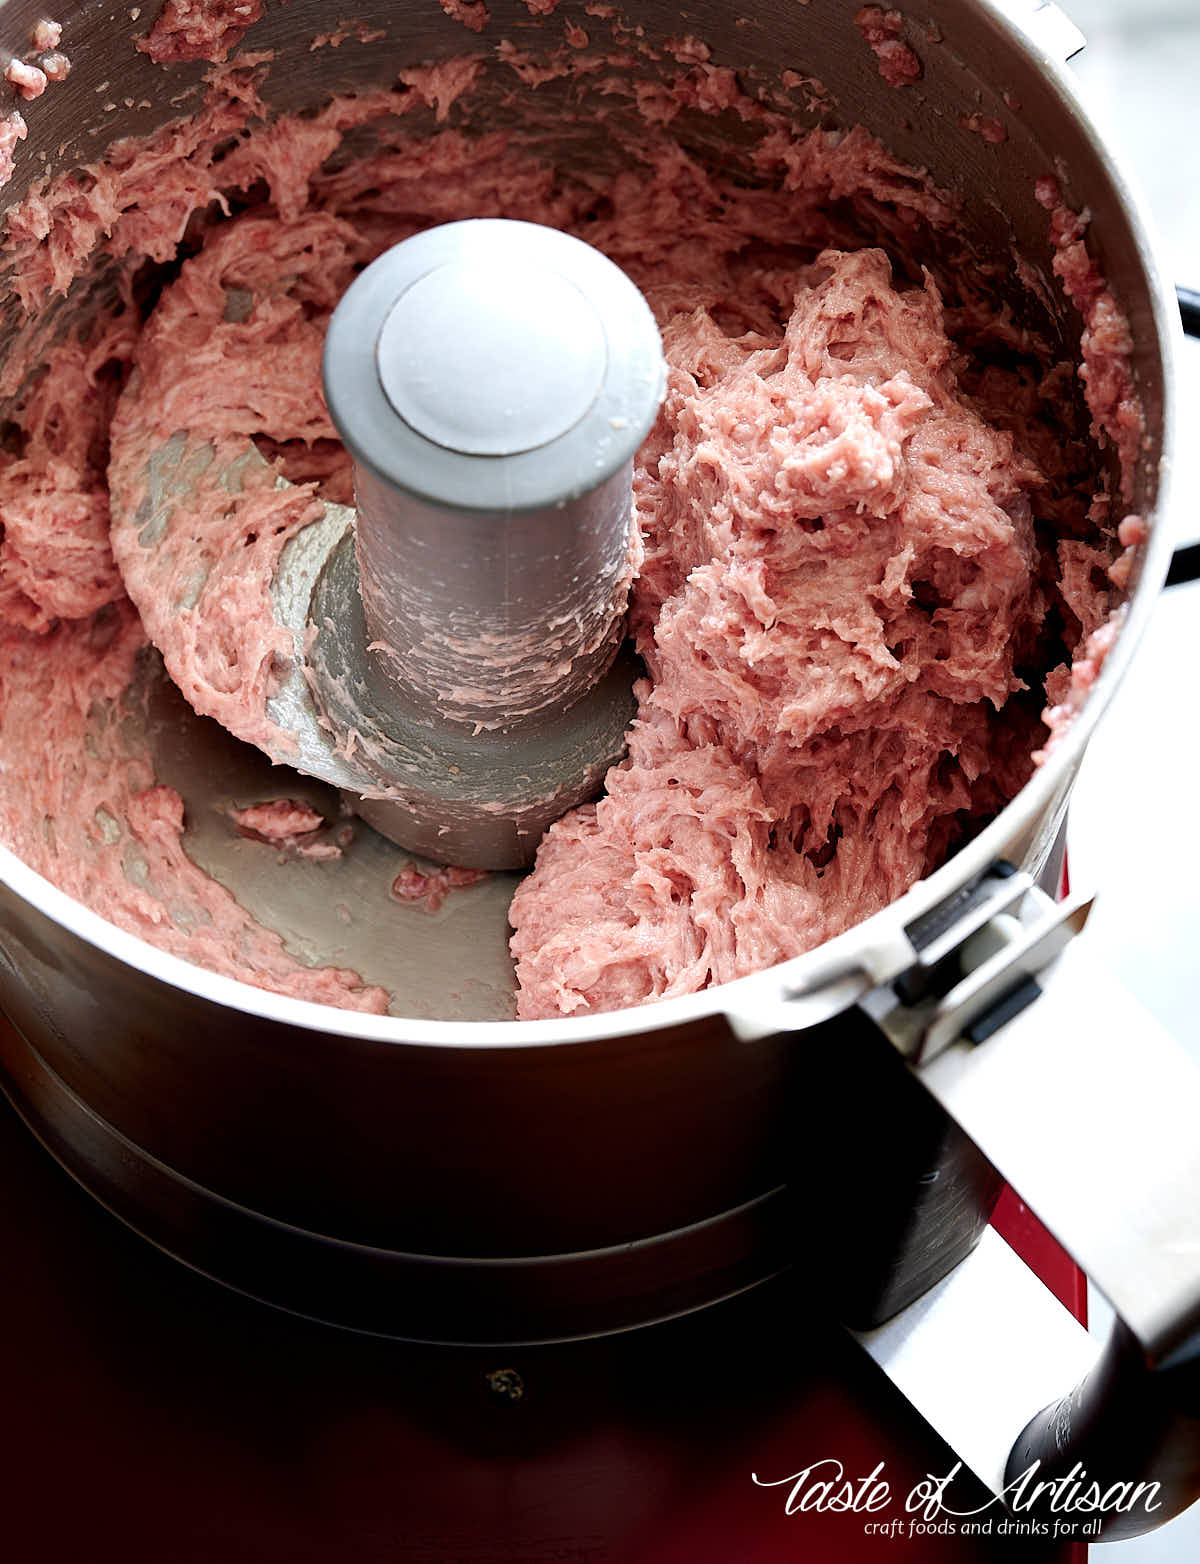 Emulsified meat inside Robot Coupe food processor.